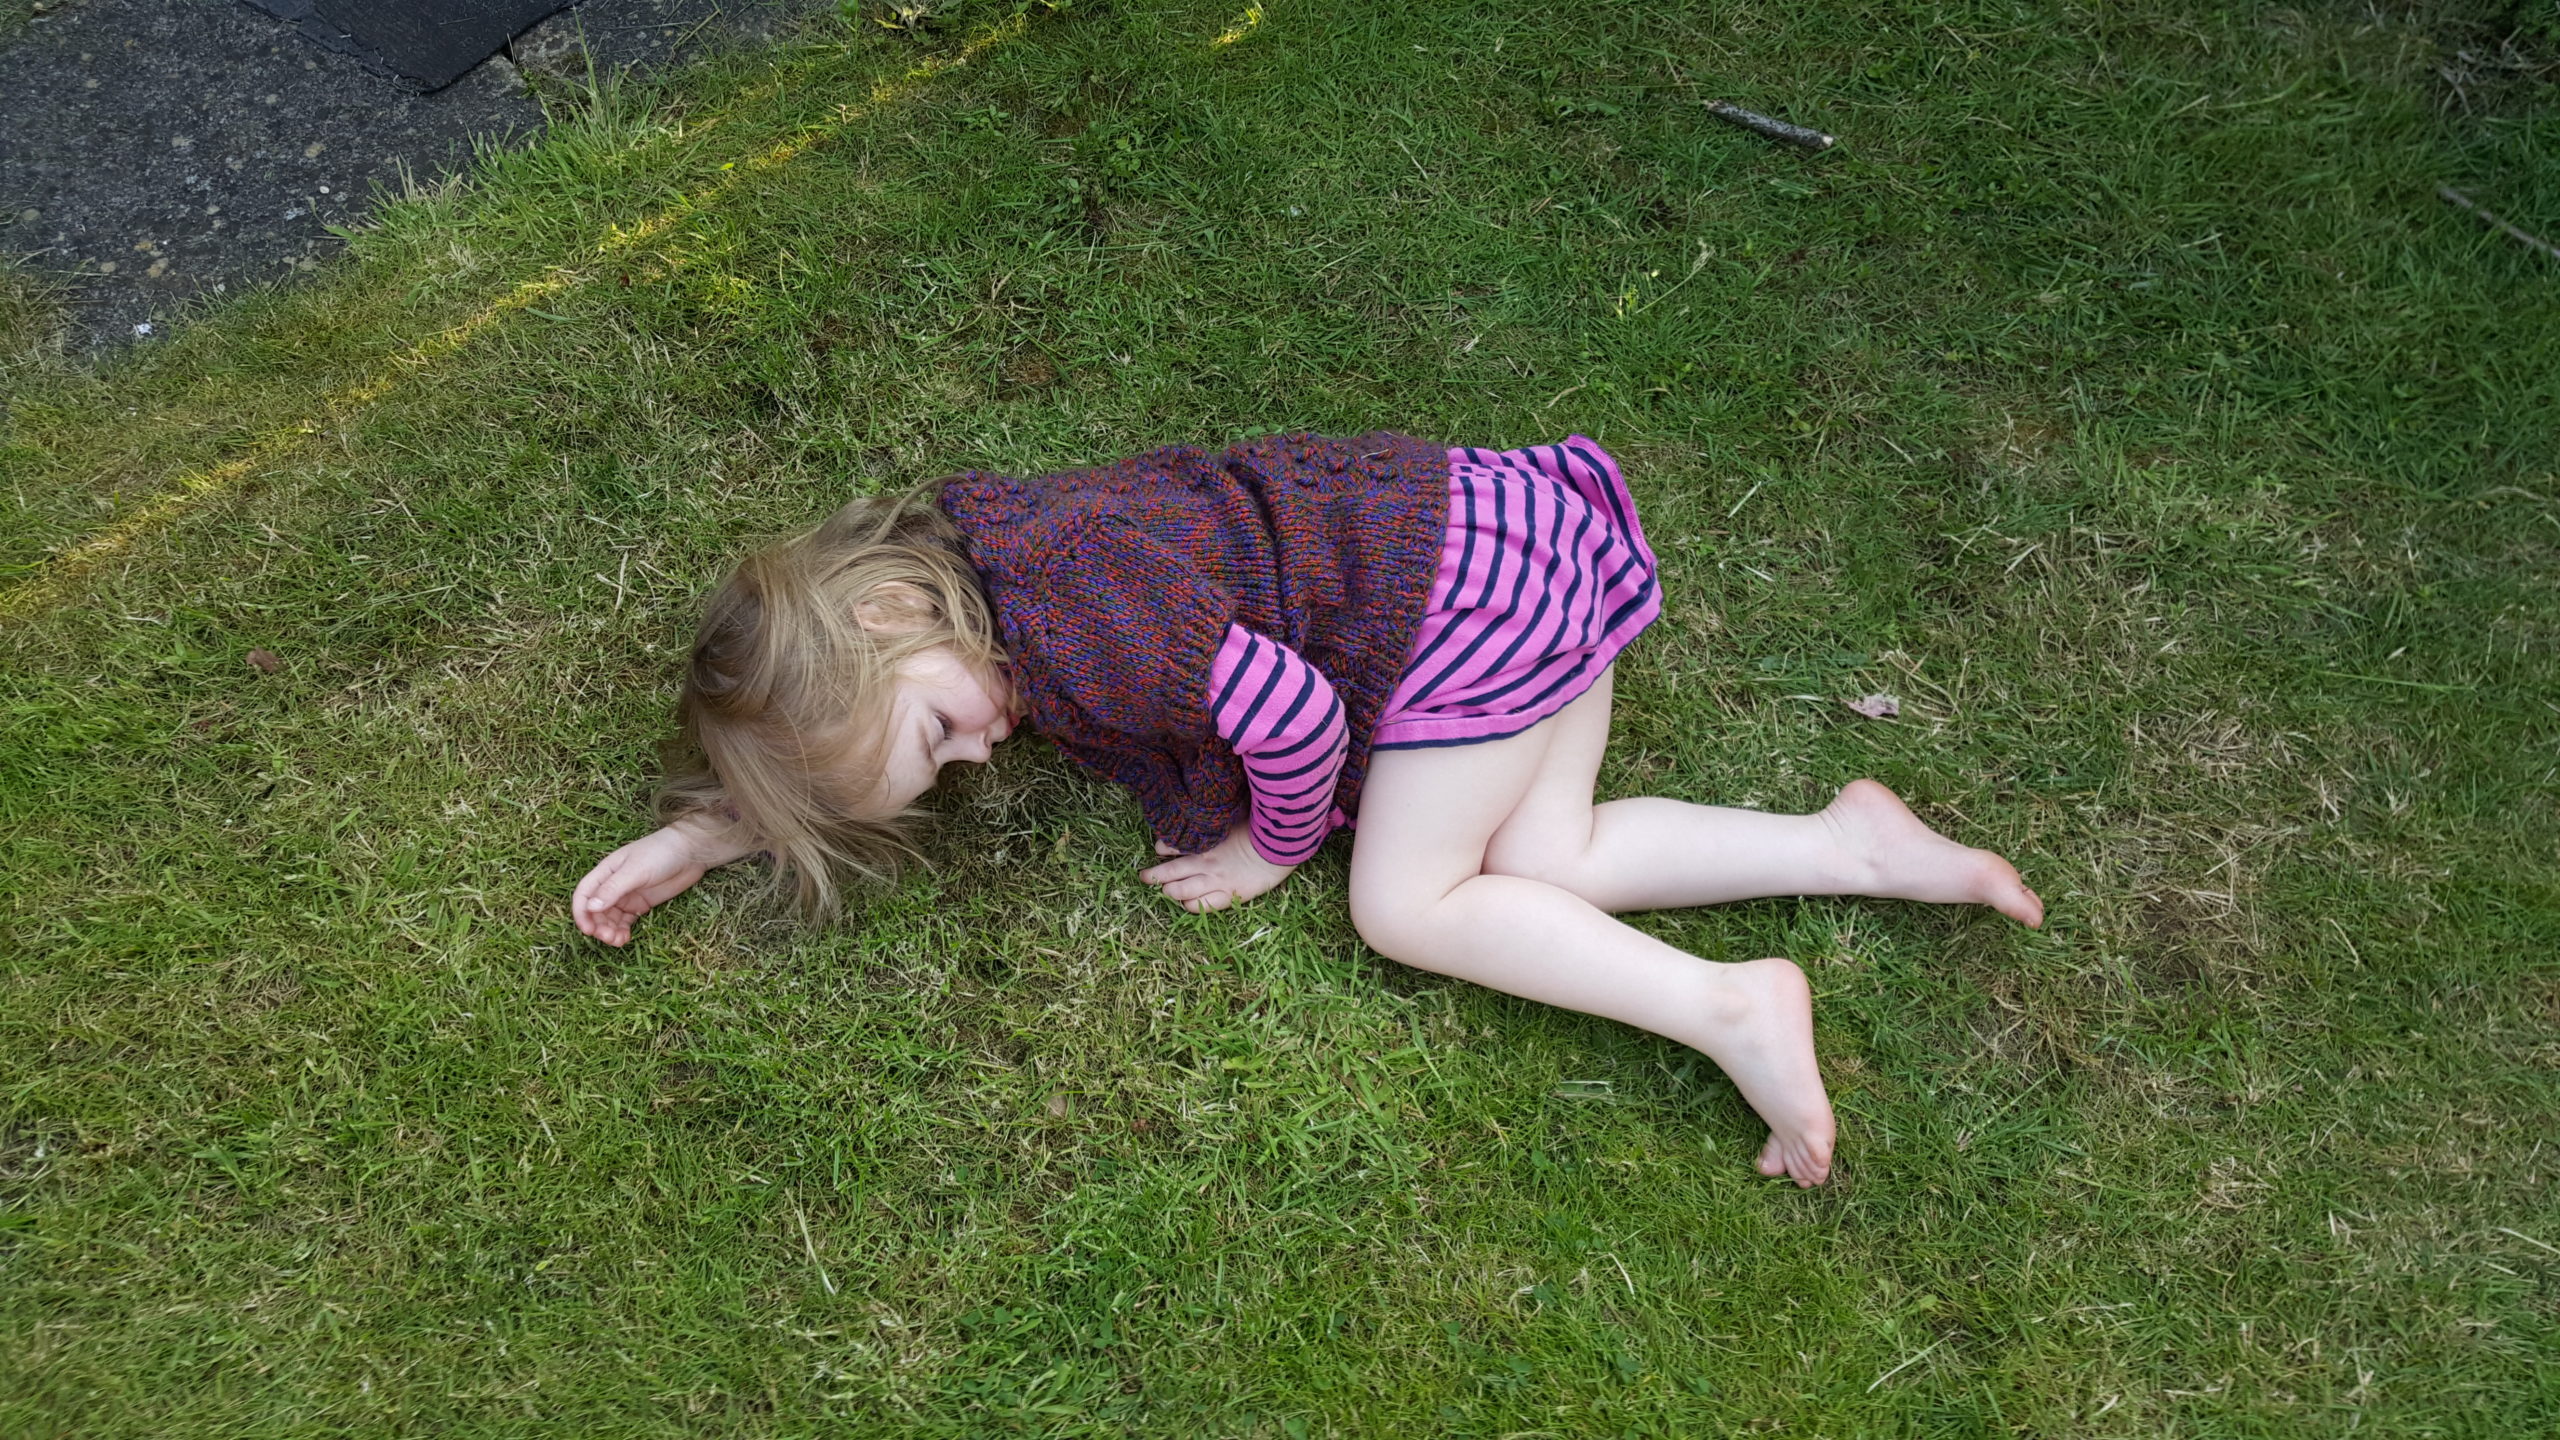 Annabel plays-dead after "falling off a mountain".